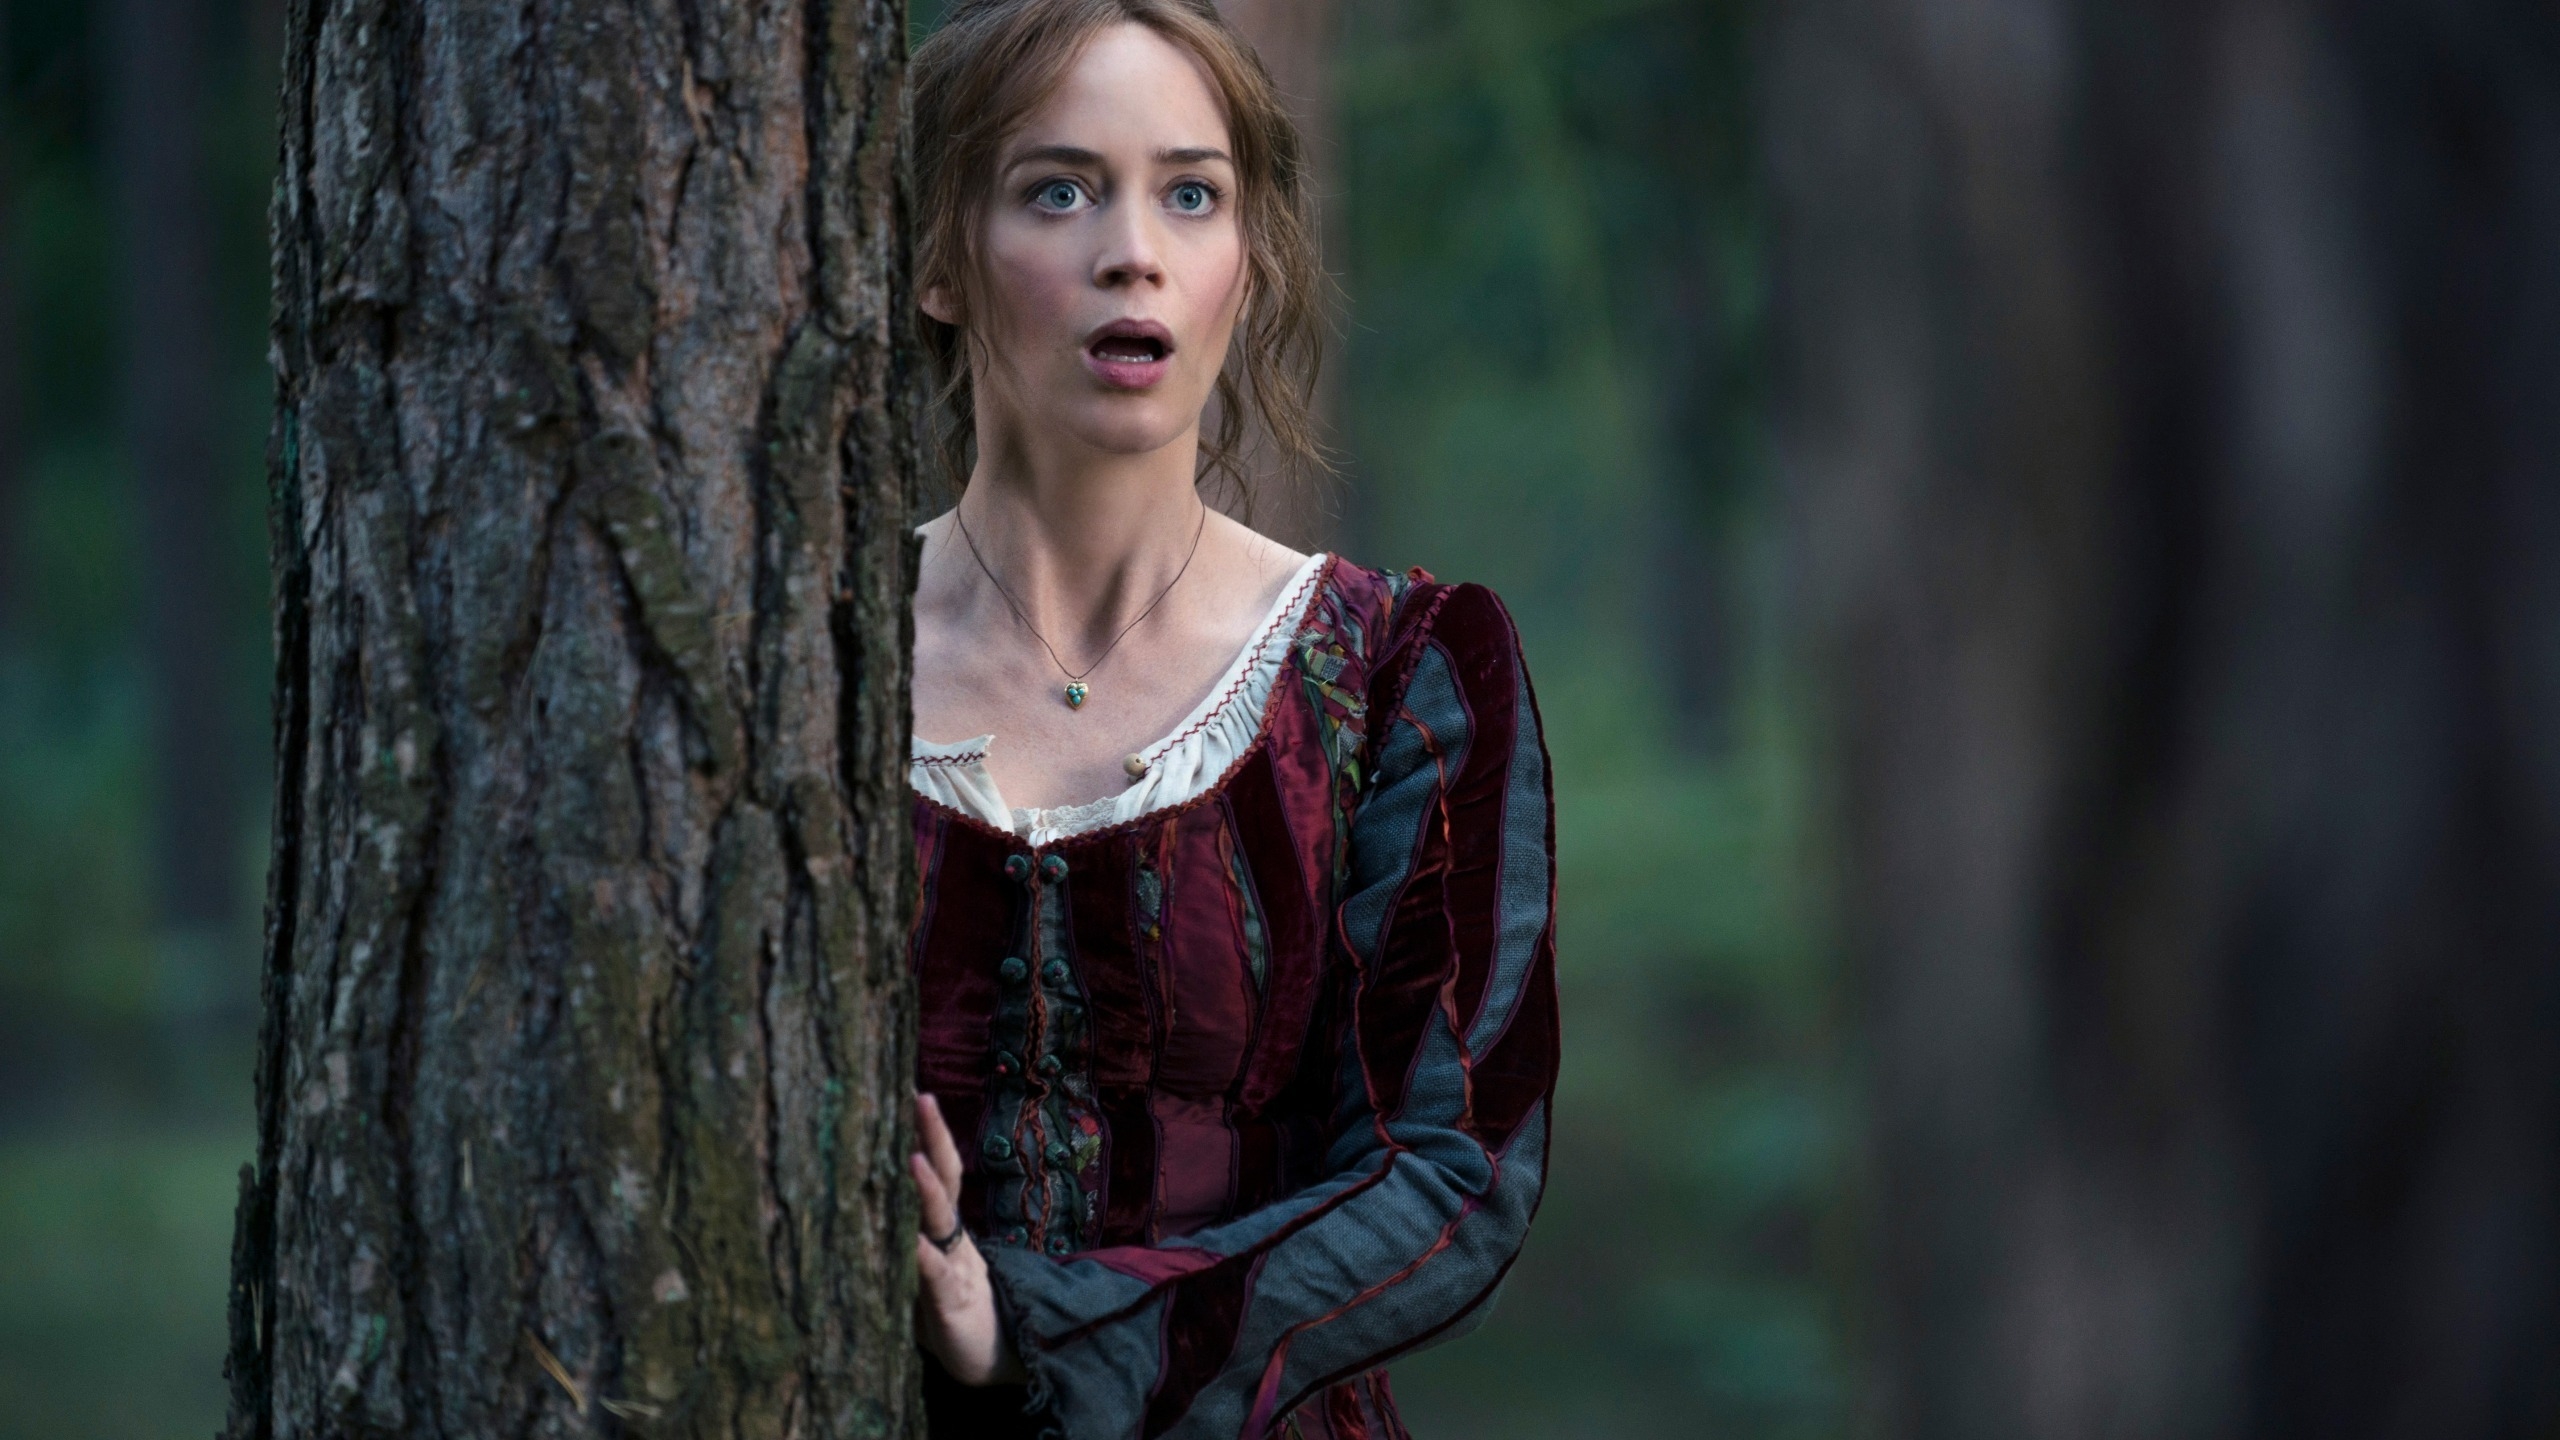 Into the Woods Emily Blunt for 2560x1440 HDTV resolution